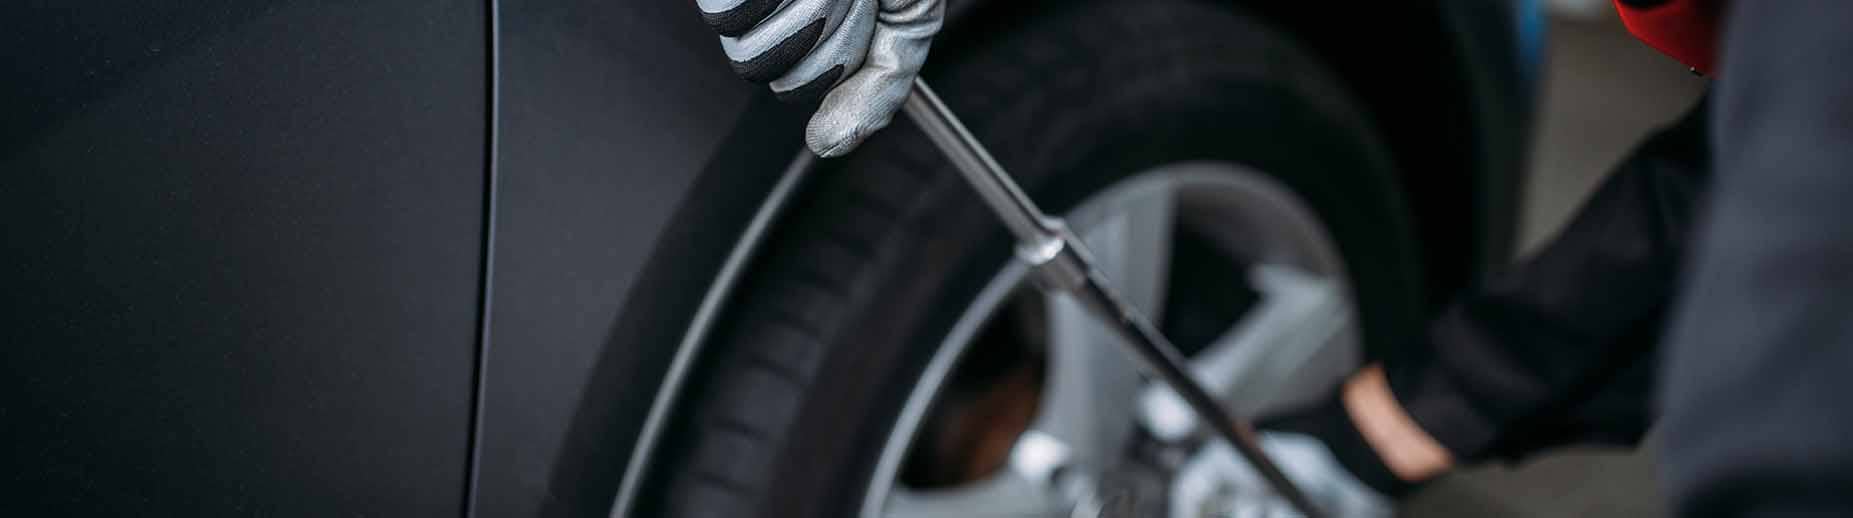 Lawrence Tire Balancing Services, Tire Rotation and Tire Repair